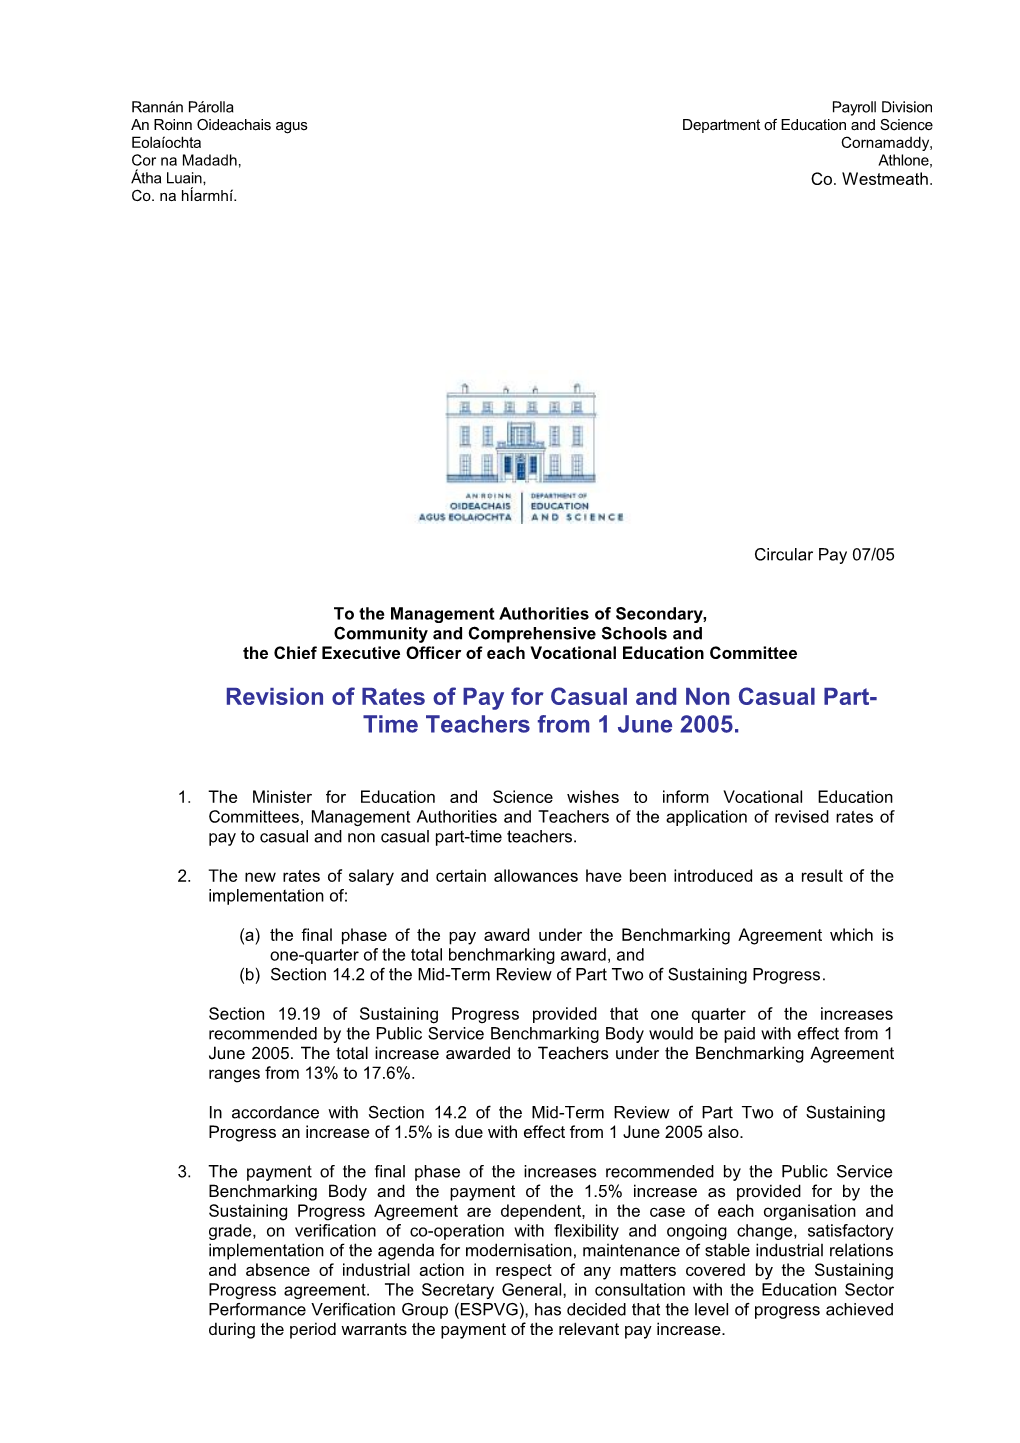 Circular 07/05 - Revision of Rates of Pay for Casual and Non Casual Part-Time Teachers